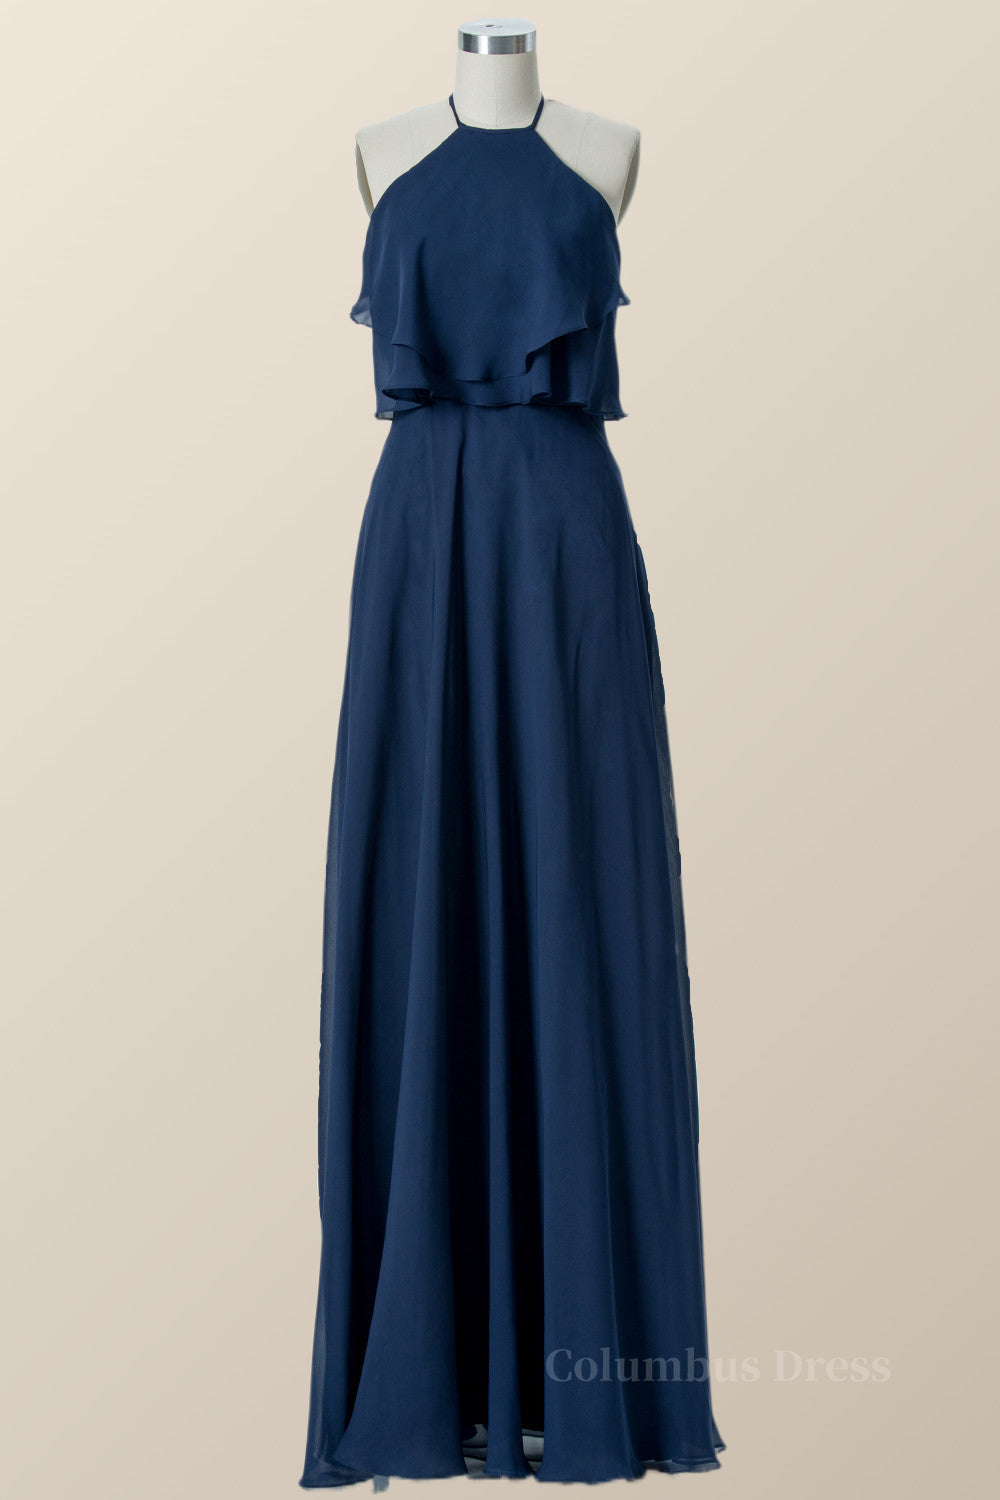 Prom Dress With Tulle, Halter Navy Blue Chiffon Long Bridesmaid Dress